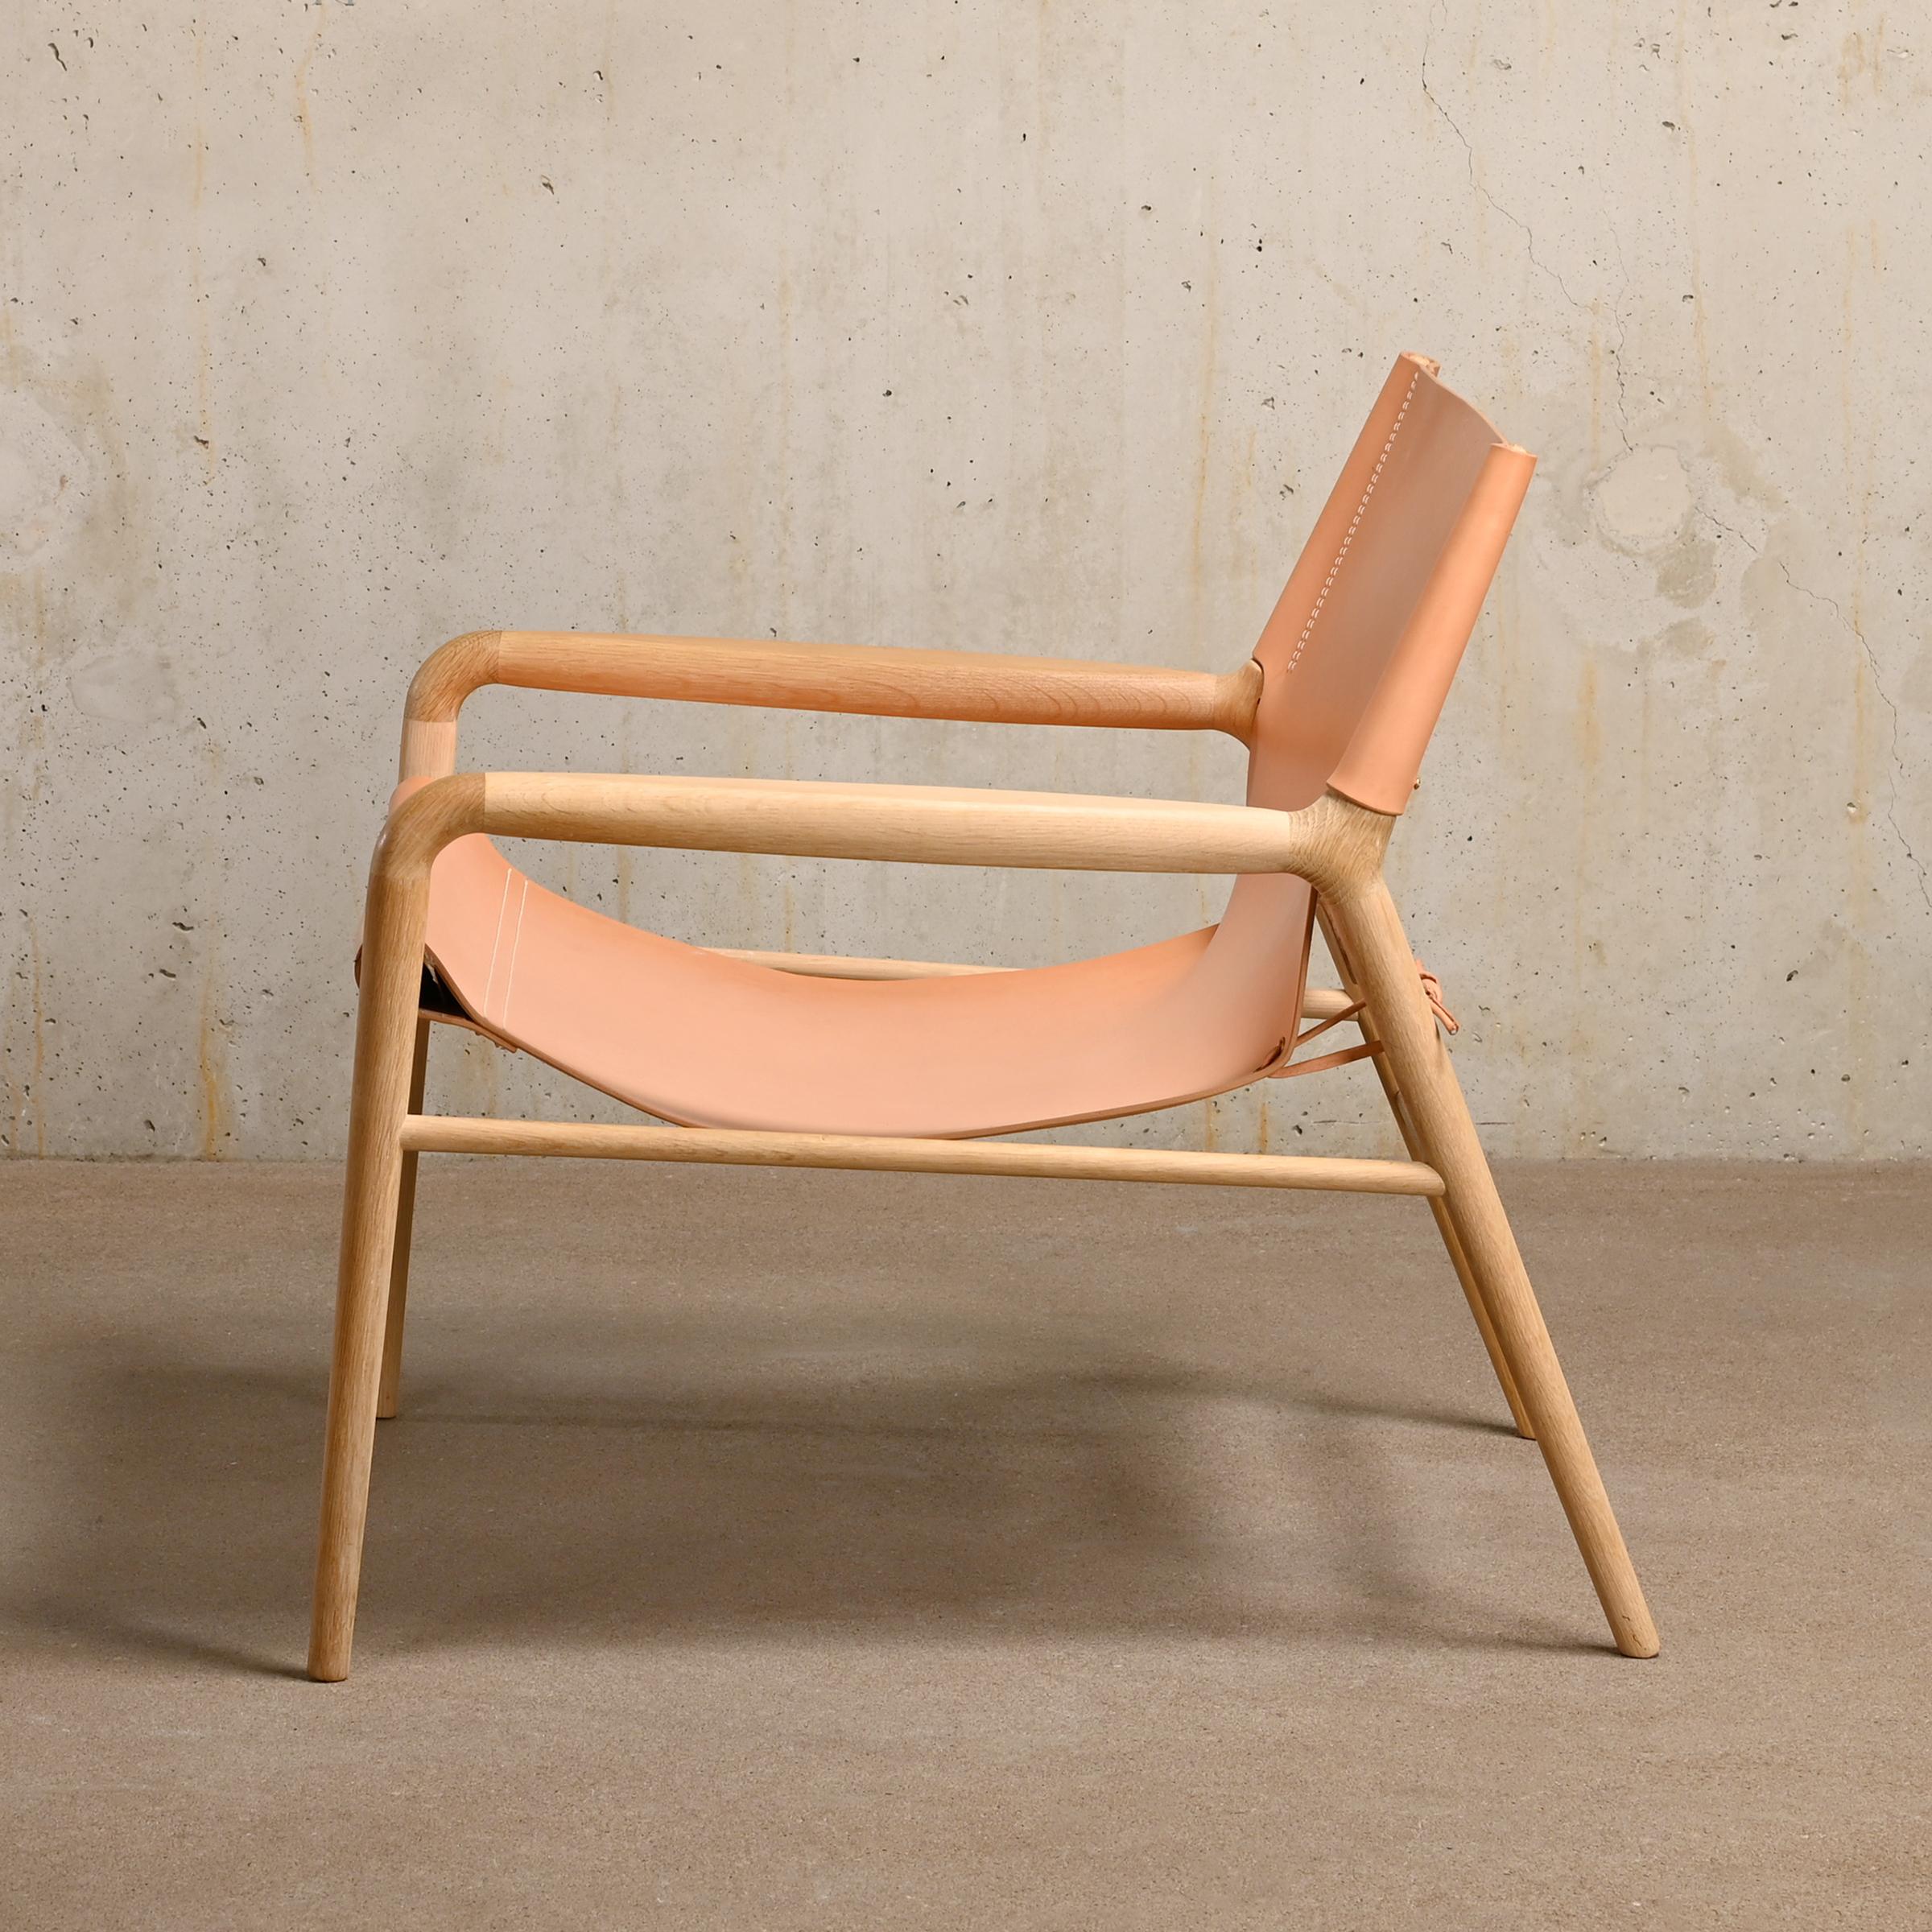 Scandinavian Modern Dennis Marquart Rama Chair in Natural Leather and Oak for Oxdenmarq For Sale